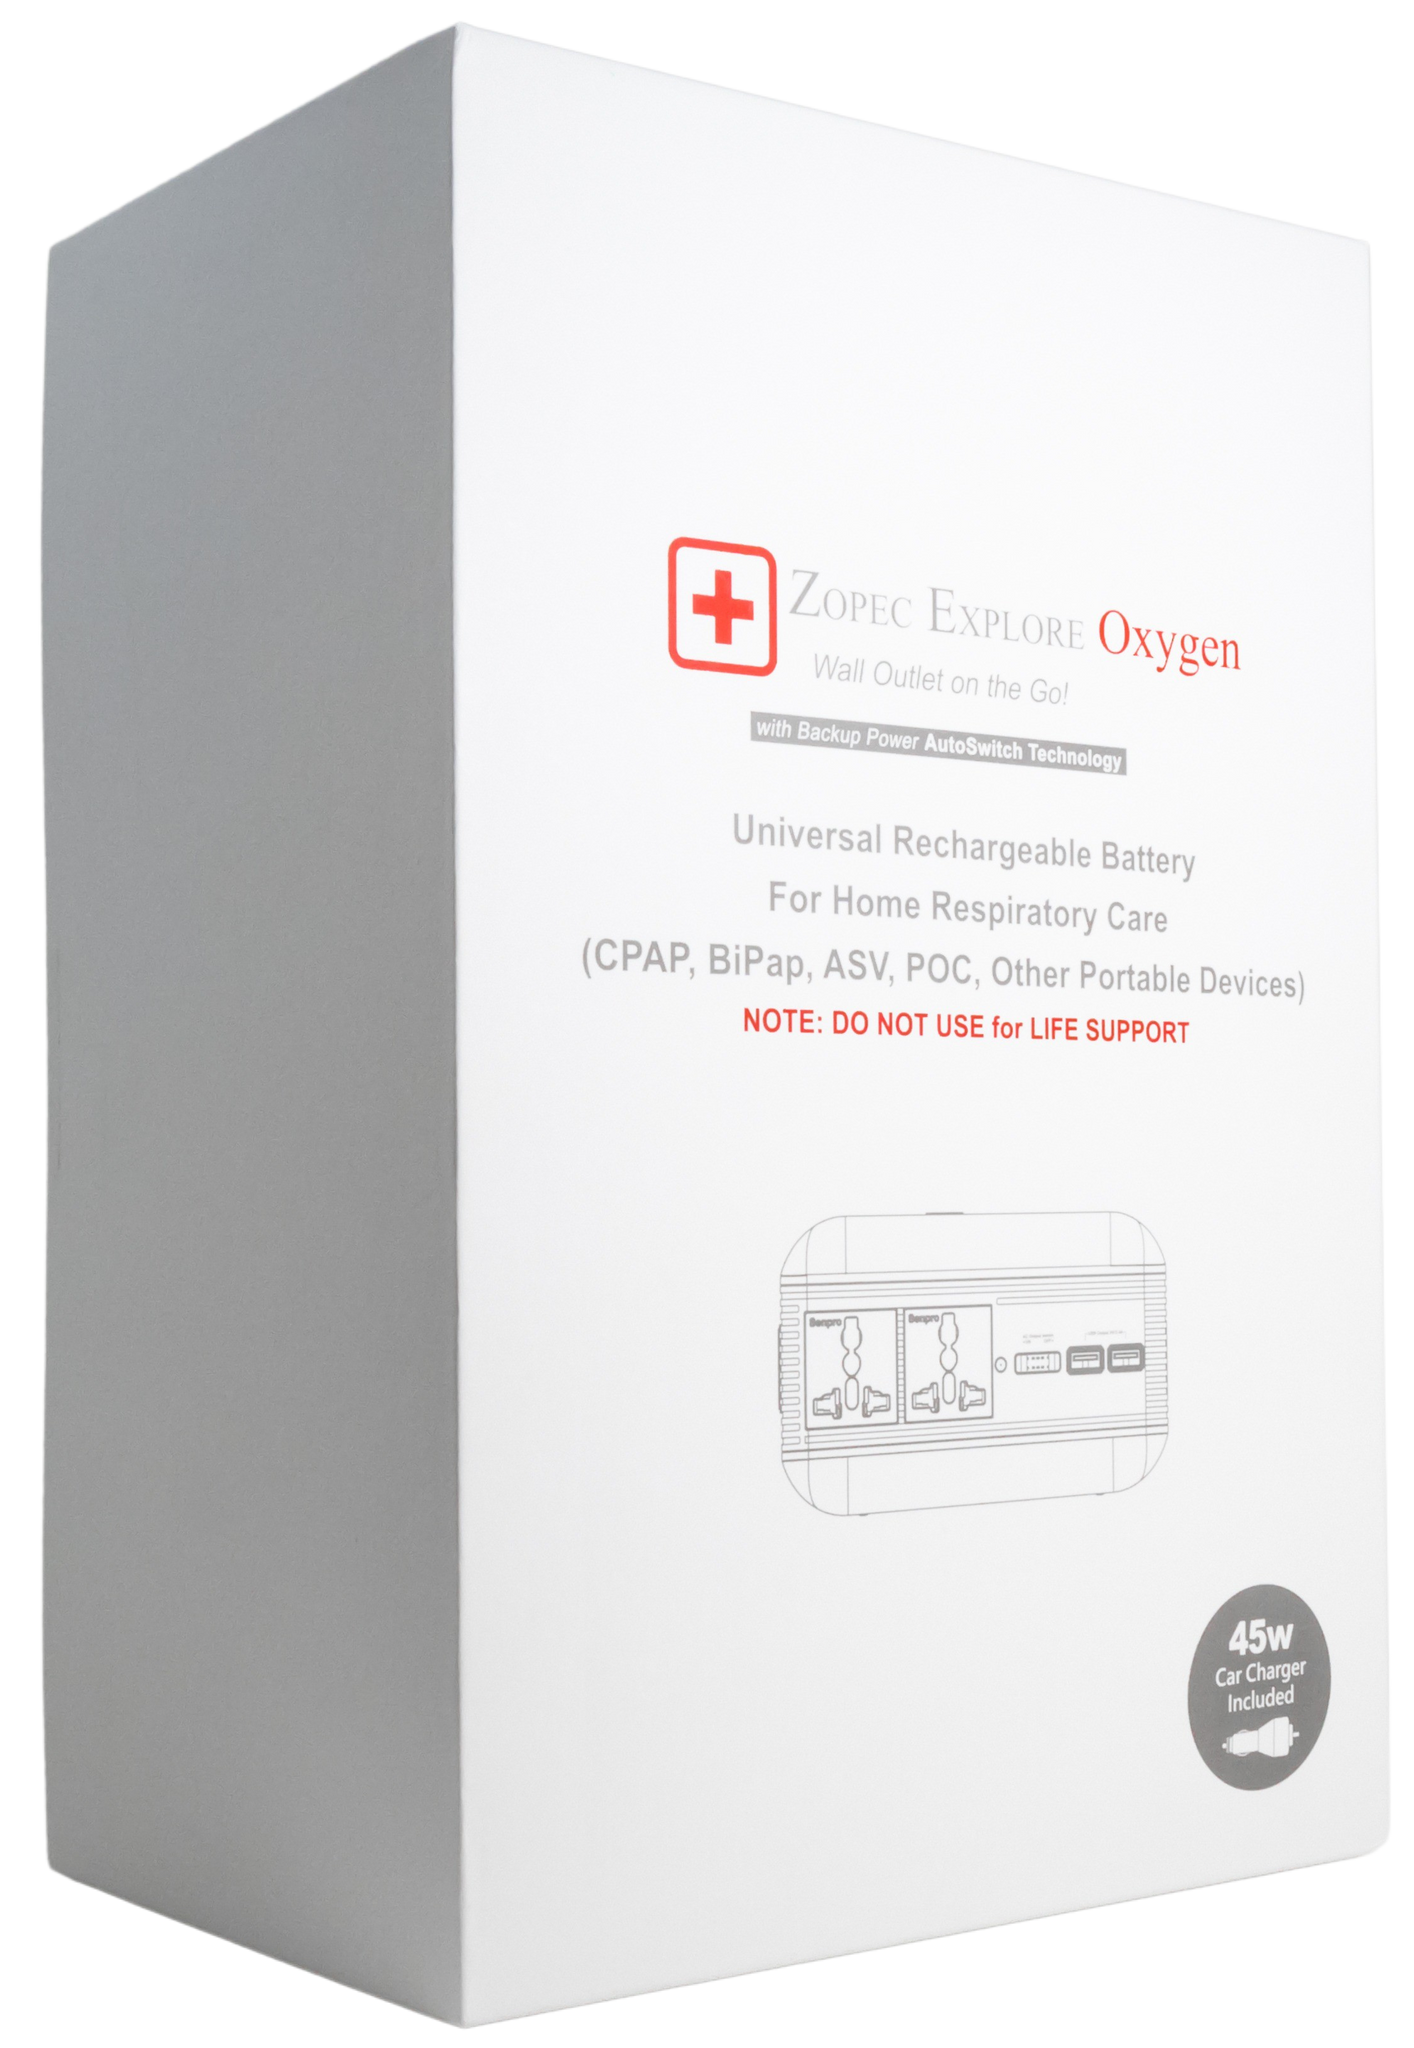 EXPLORE Oxygen CPAP/BPAP Home UPS Backup Battery By Zopec